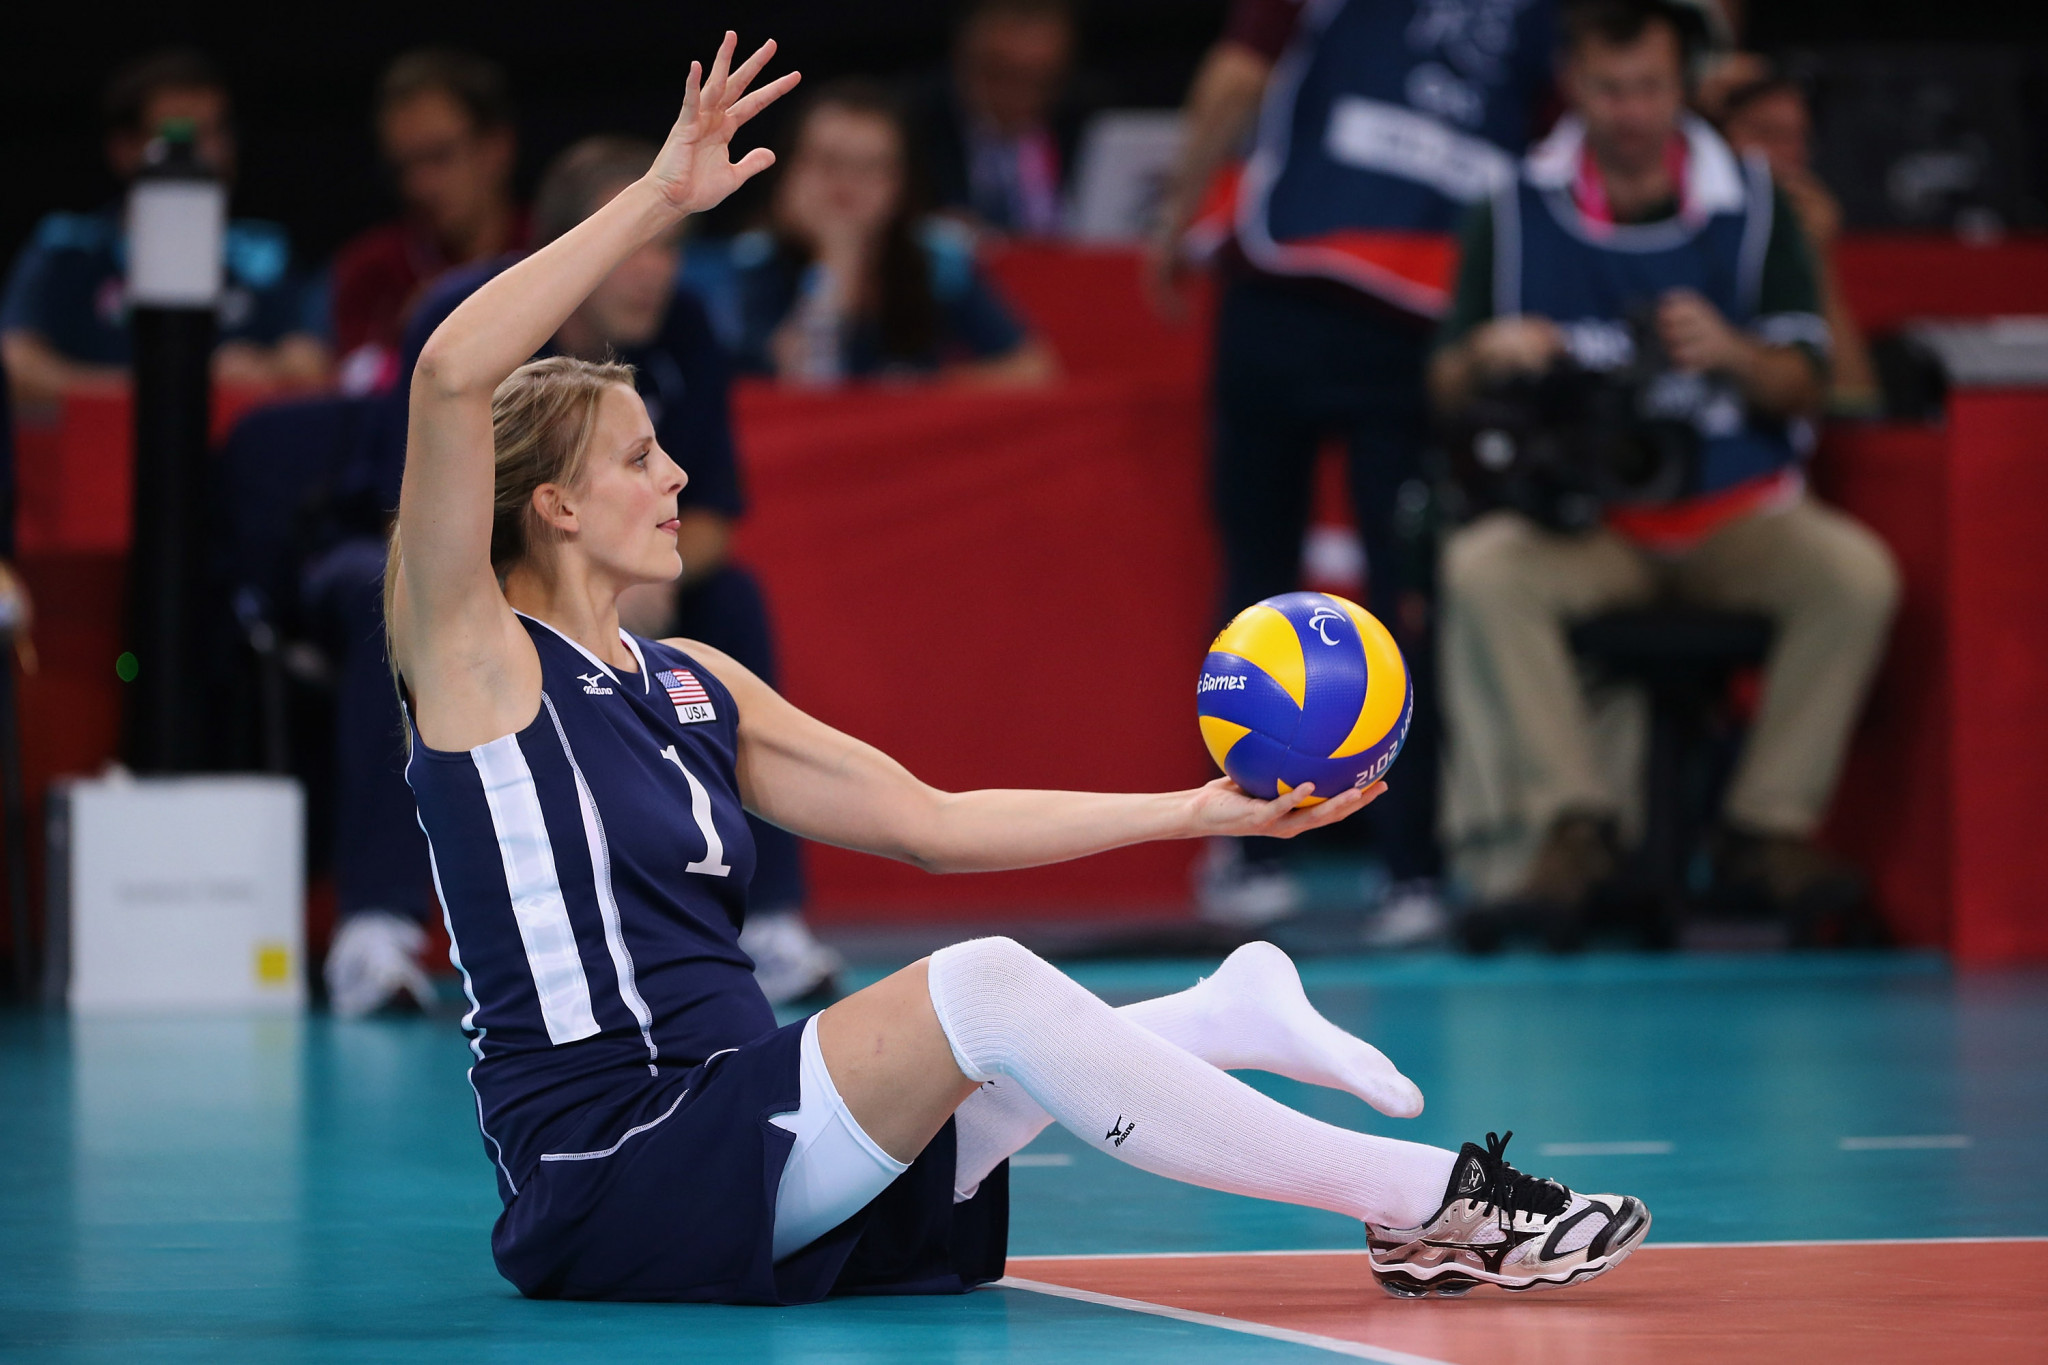 Paralympic sitting volleyball champion Webster to play at Tokyo 2020 while pregnant